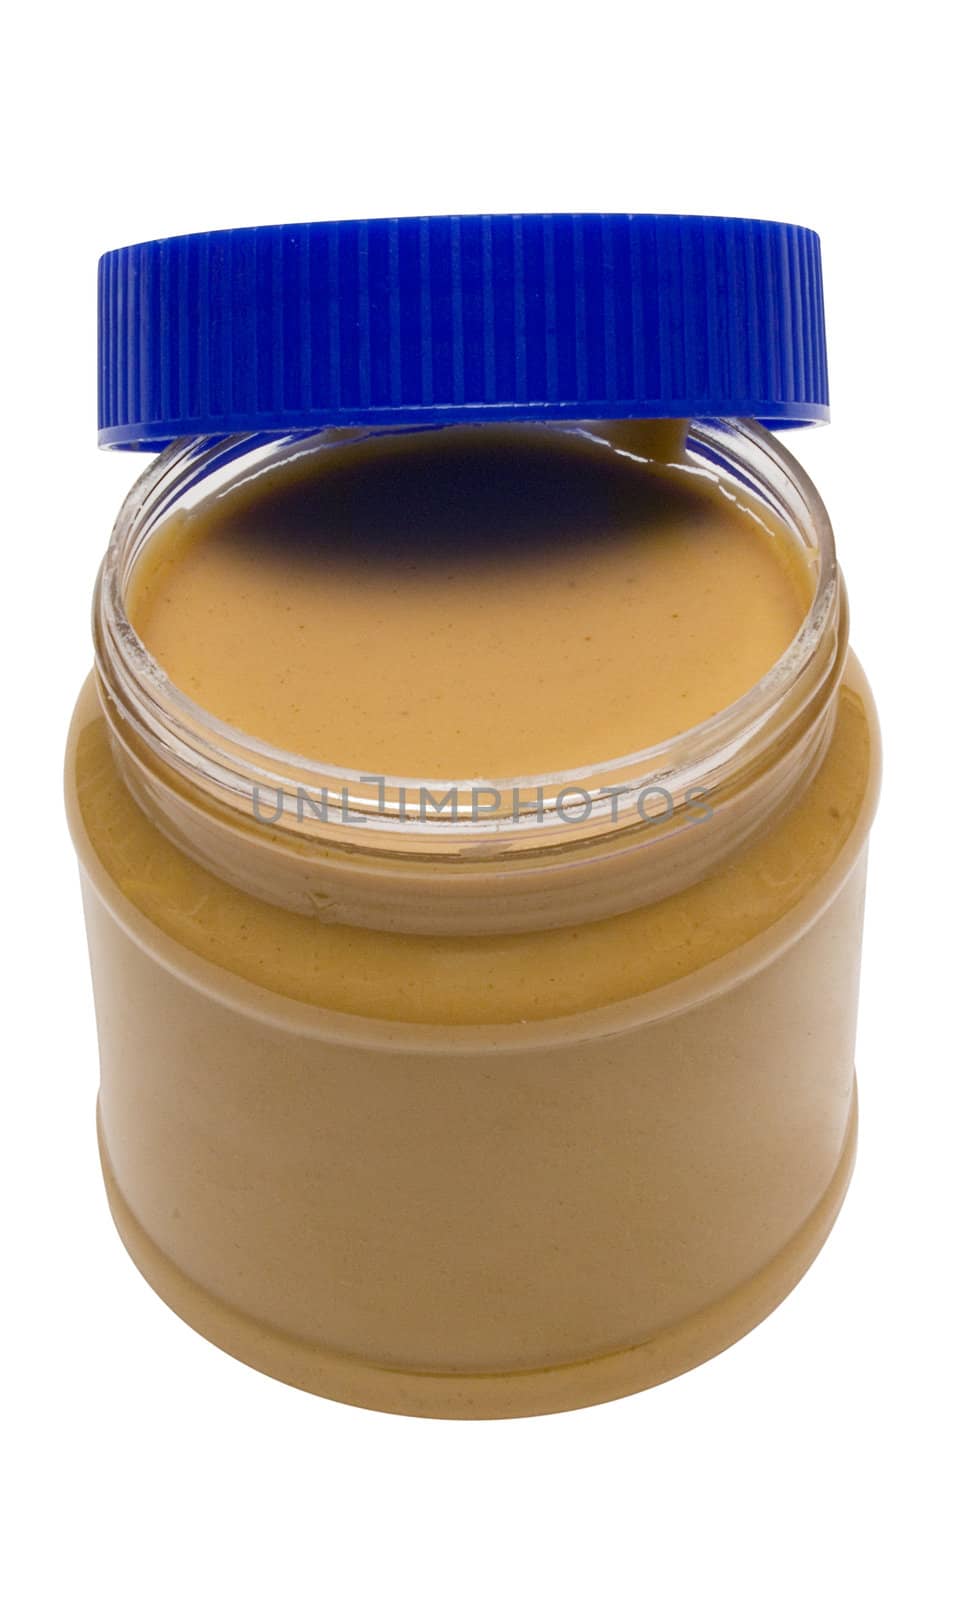 Open glass of peanut butter isolated on a white background. File contains clipping path.